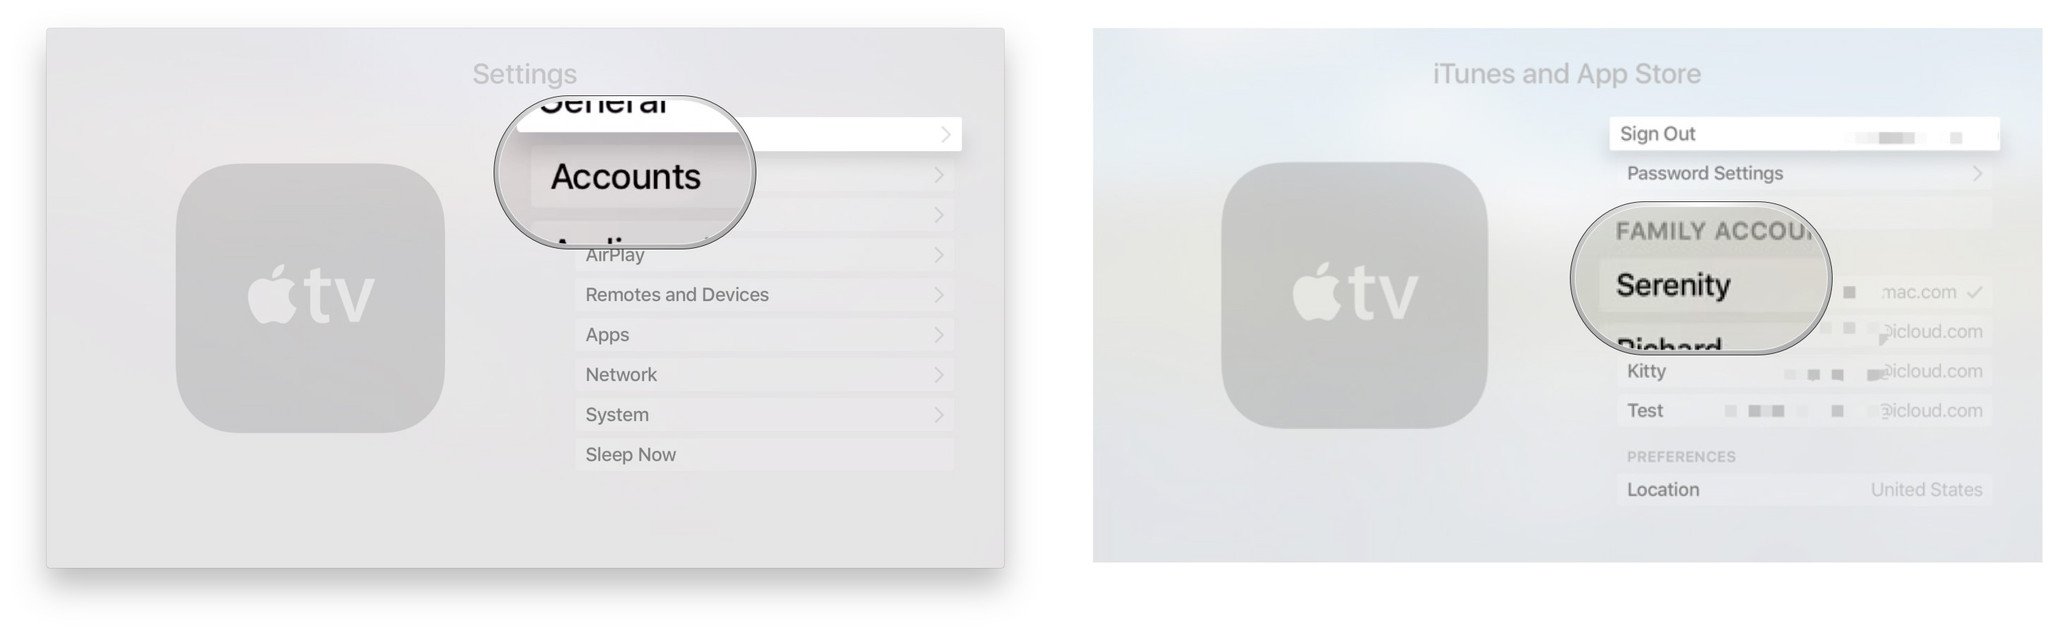 To switch between multiple accounts on Apple TV, launch Settings on your Home Screen, click Accounts, then iTunes and App Store. Click on the account to use. 